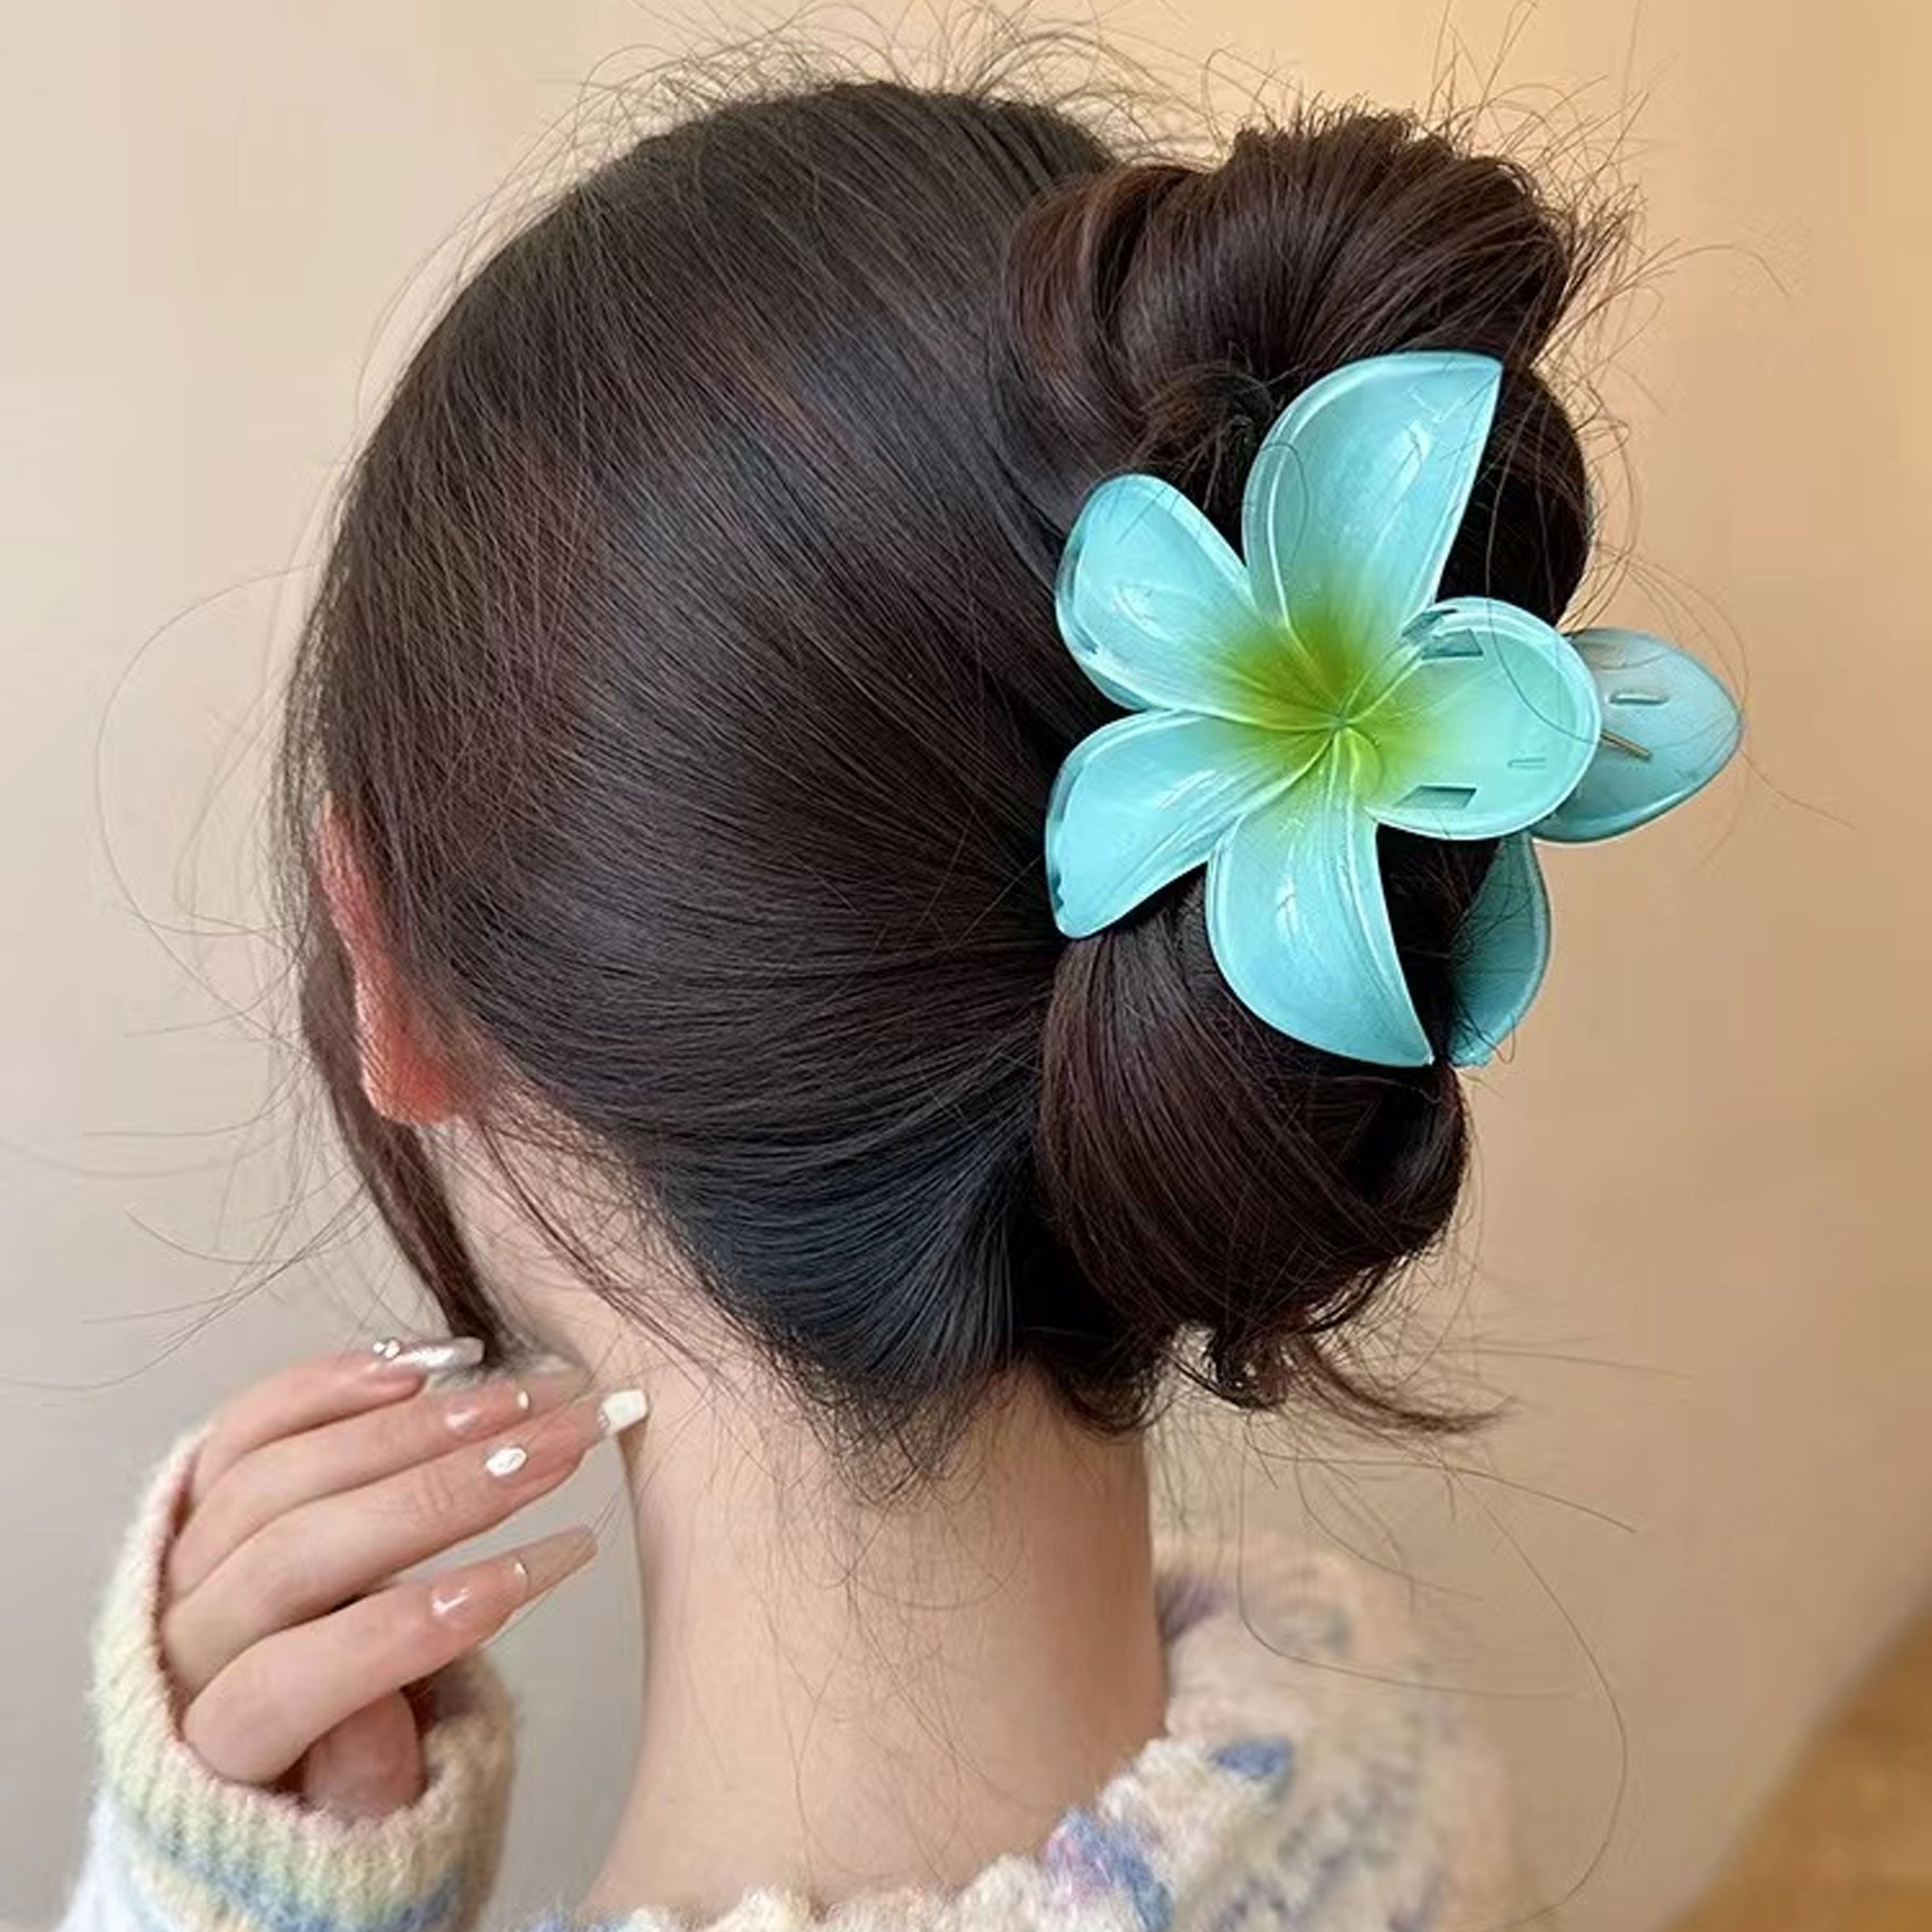 

1pc Flower Hair Claw Clips, Acrylic Frangipani Shark Clips, Elegant Sweet Style, Summer Fairy Vacation Hair Accessories For Updos